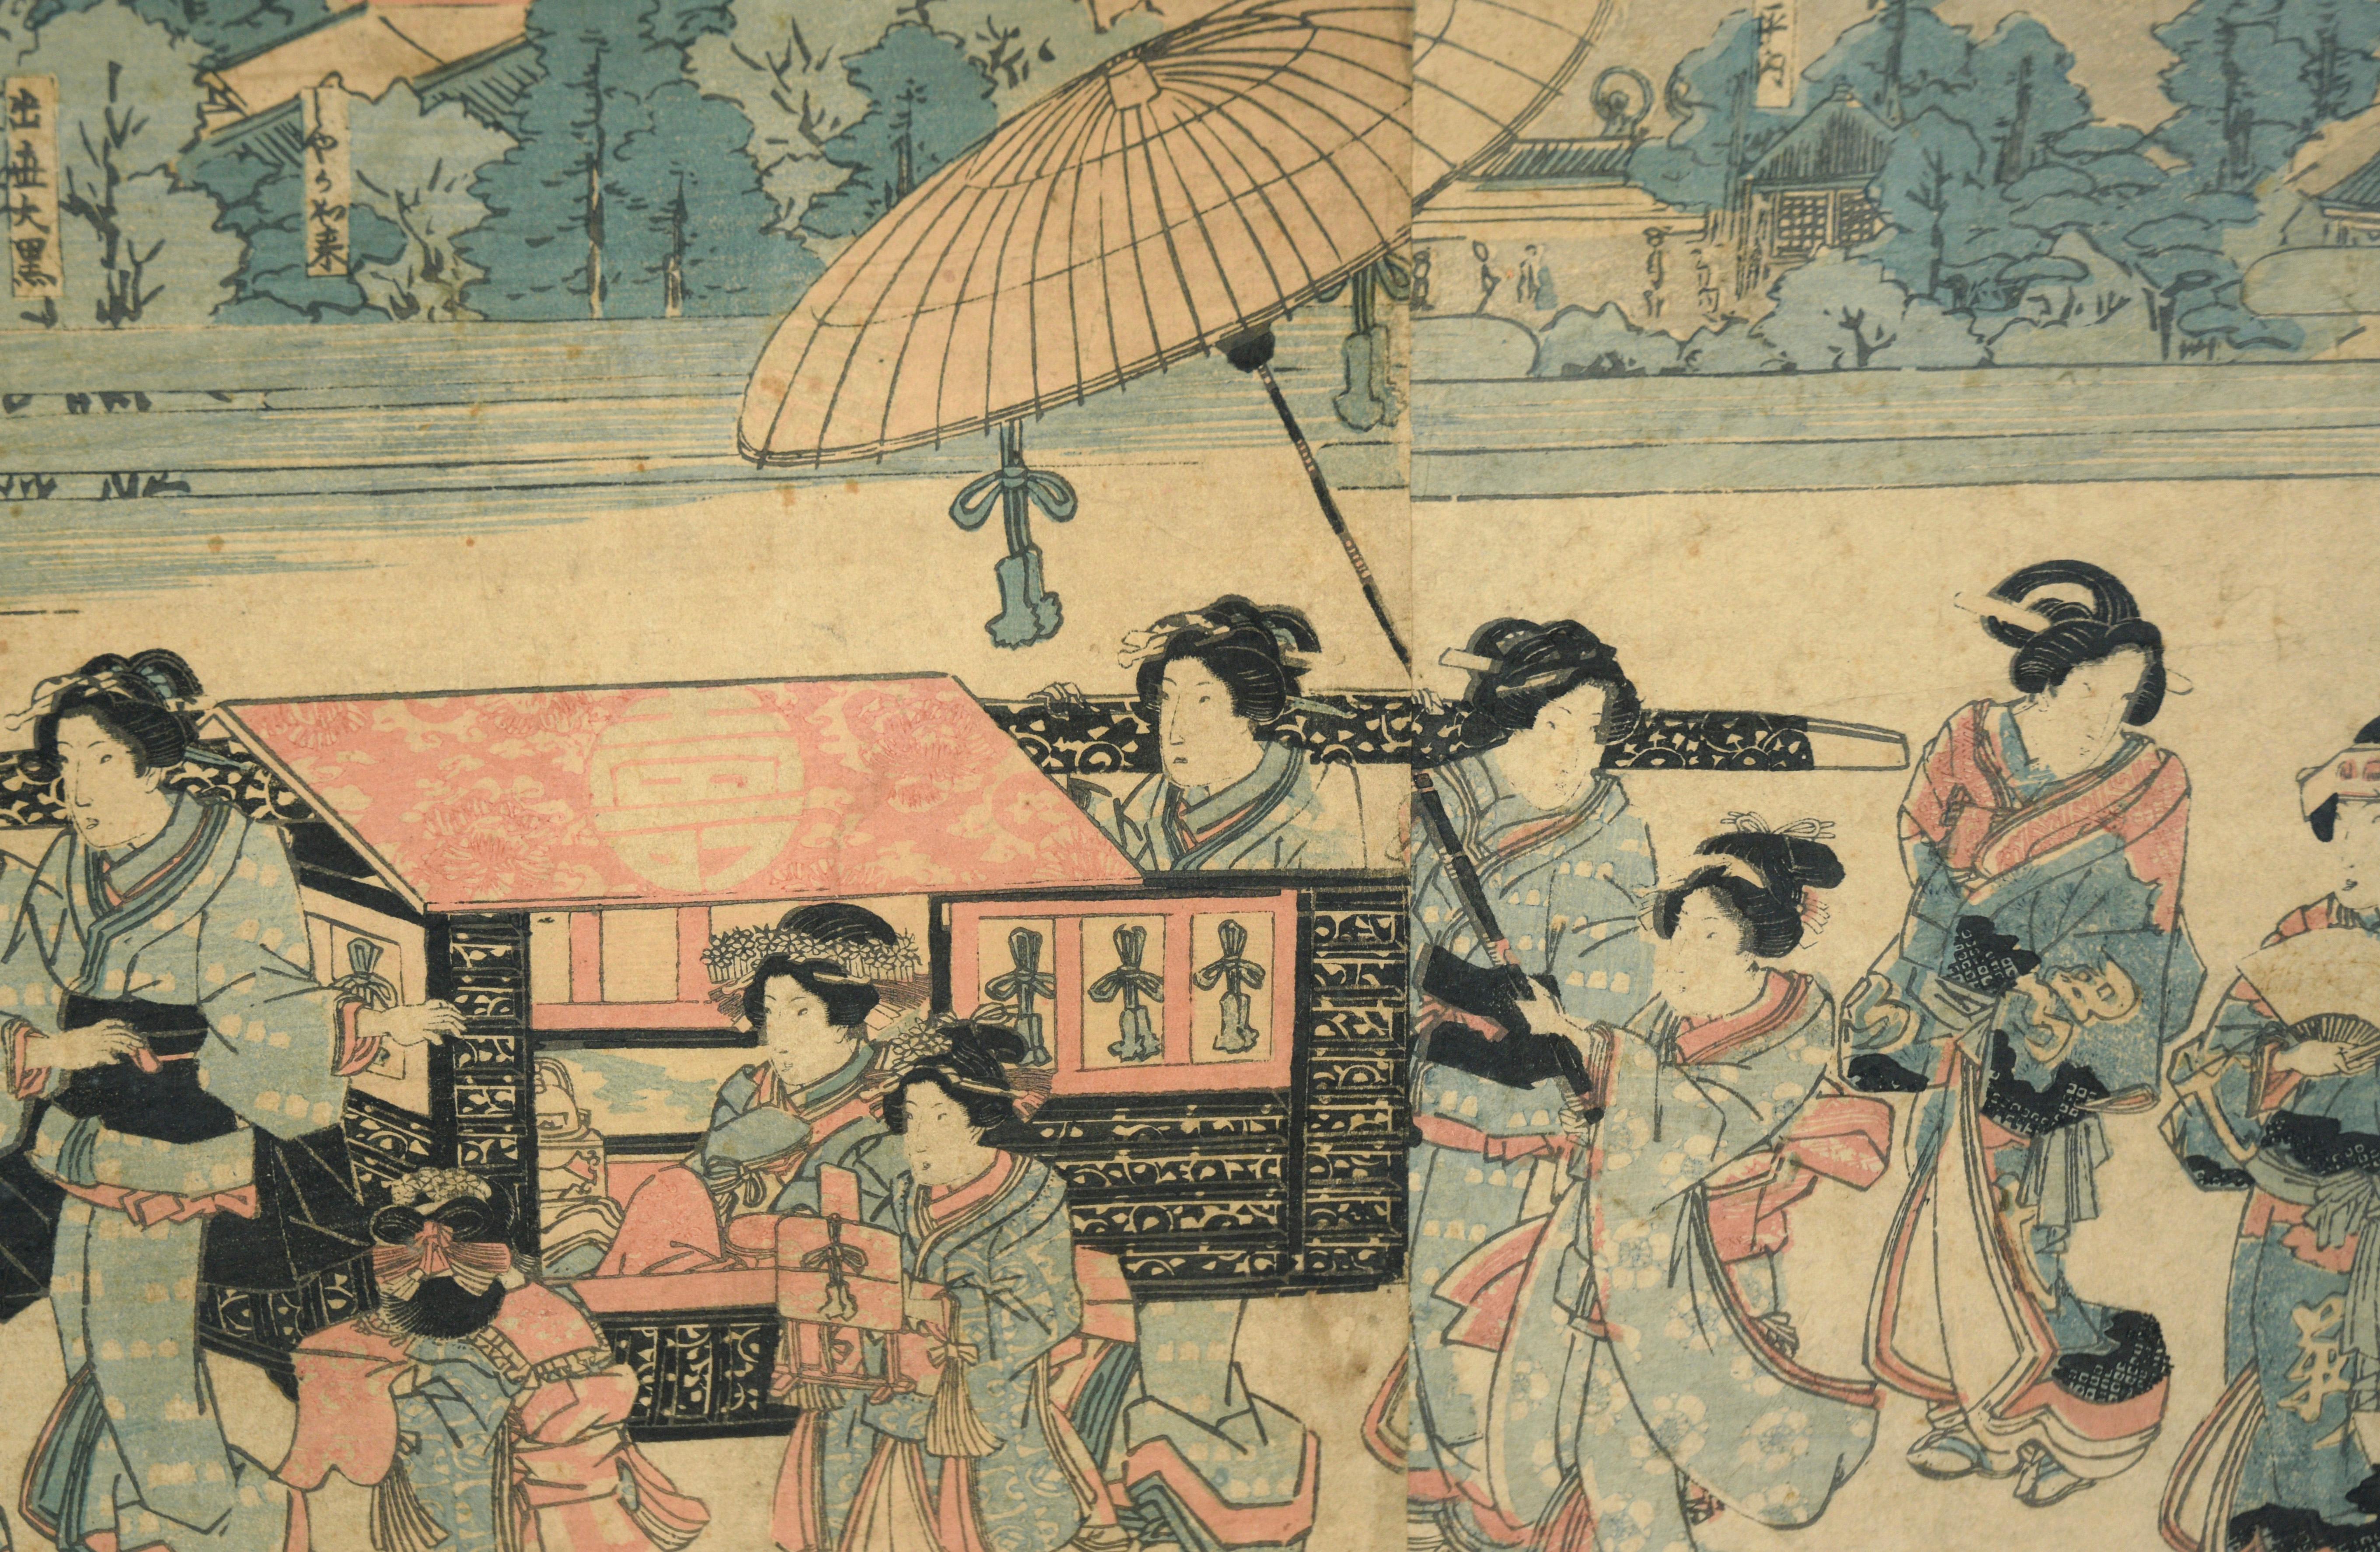 Japanese Parade - Woodblock Print

Japanese woodblock print by Utagawa Kuniyasu (歌川 国安) (Japan, 1794–1832). Japanese women, dressed in blue and red kimonos, are the focal point. A village and trees can be seen in the near distance. 

The Pilgrimage